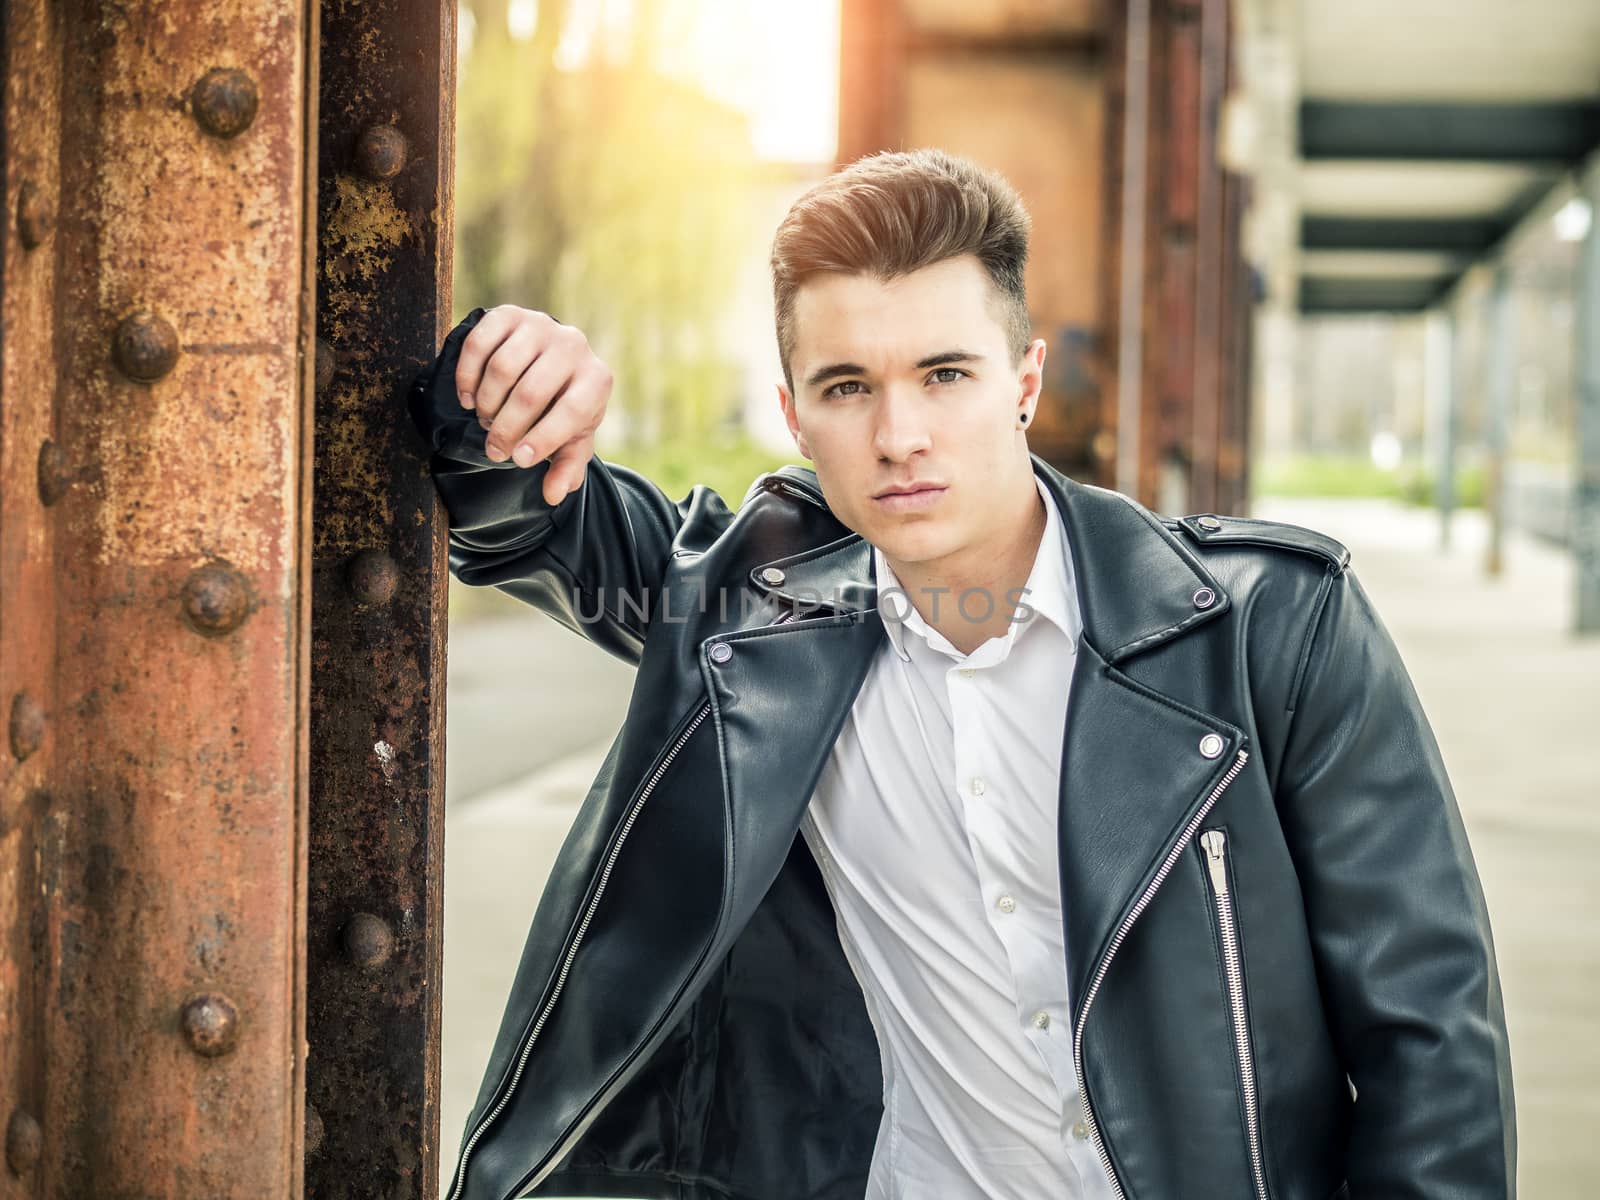 One handsome young man in urban setting in European city, standing, wearing black leather jacket and jeans